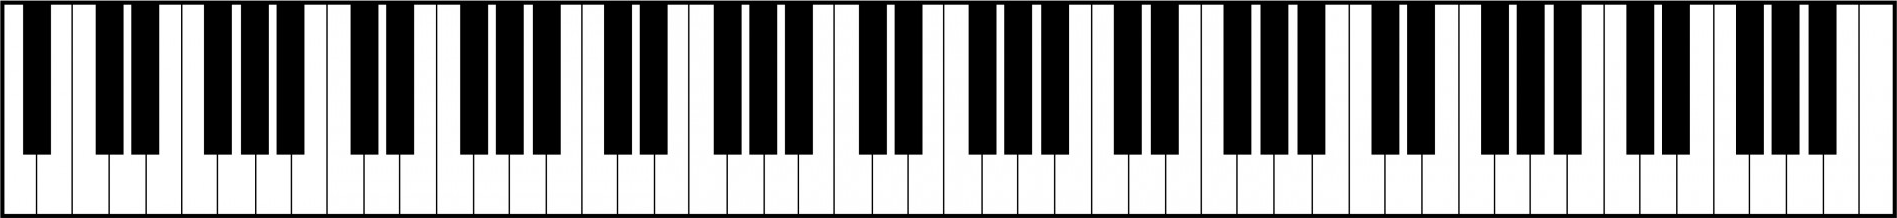 A simple drawing of the keys of a piano. Public Domain Illustration by Karen Arnold